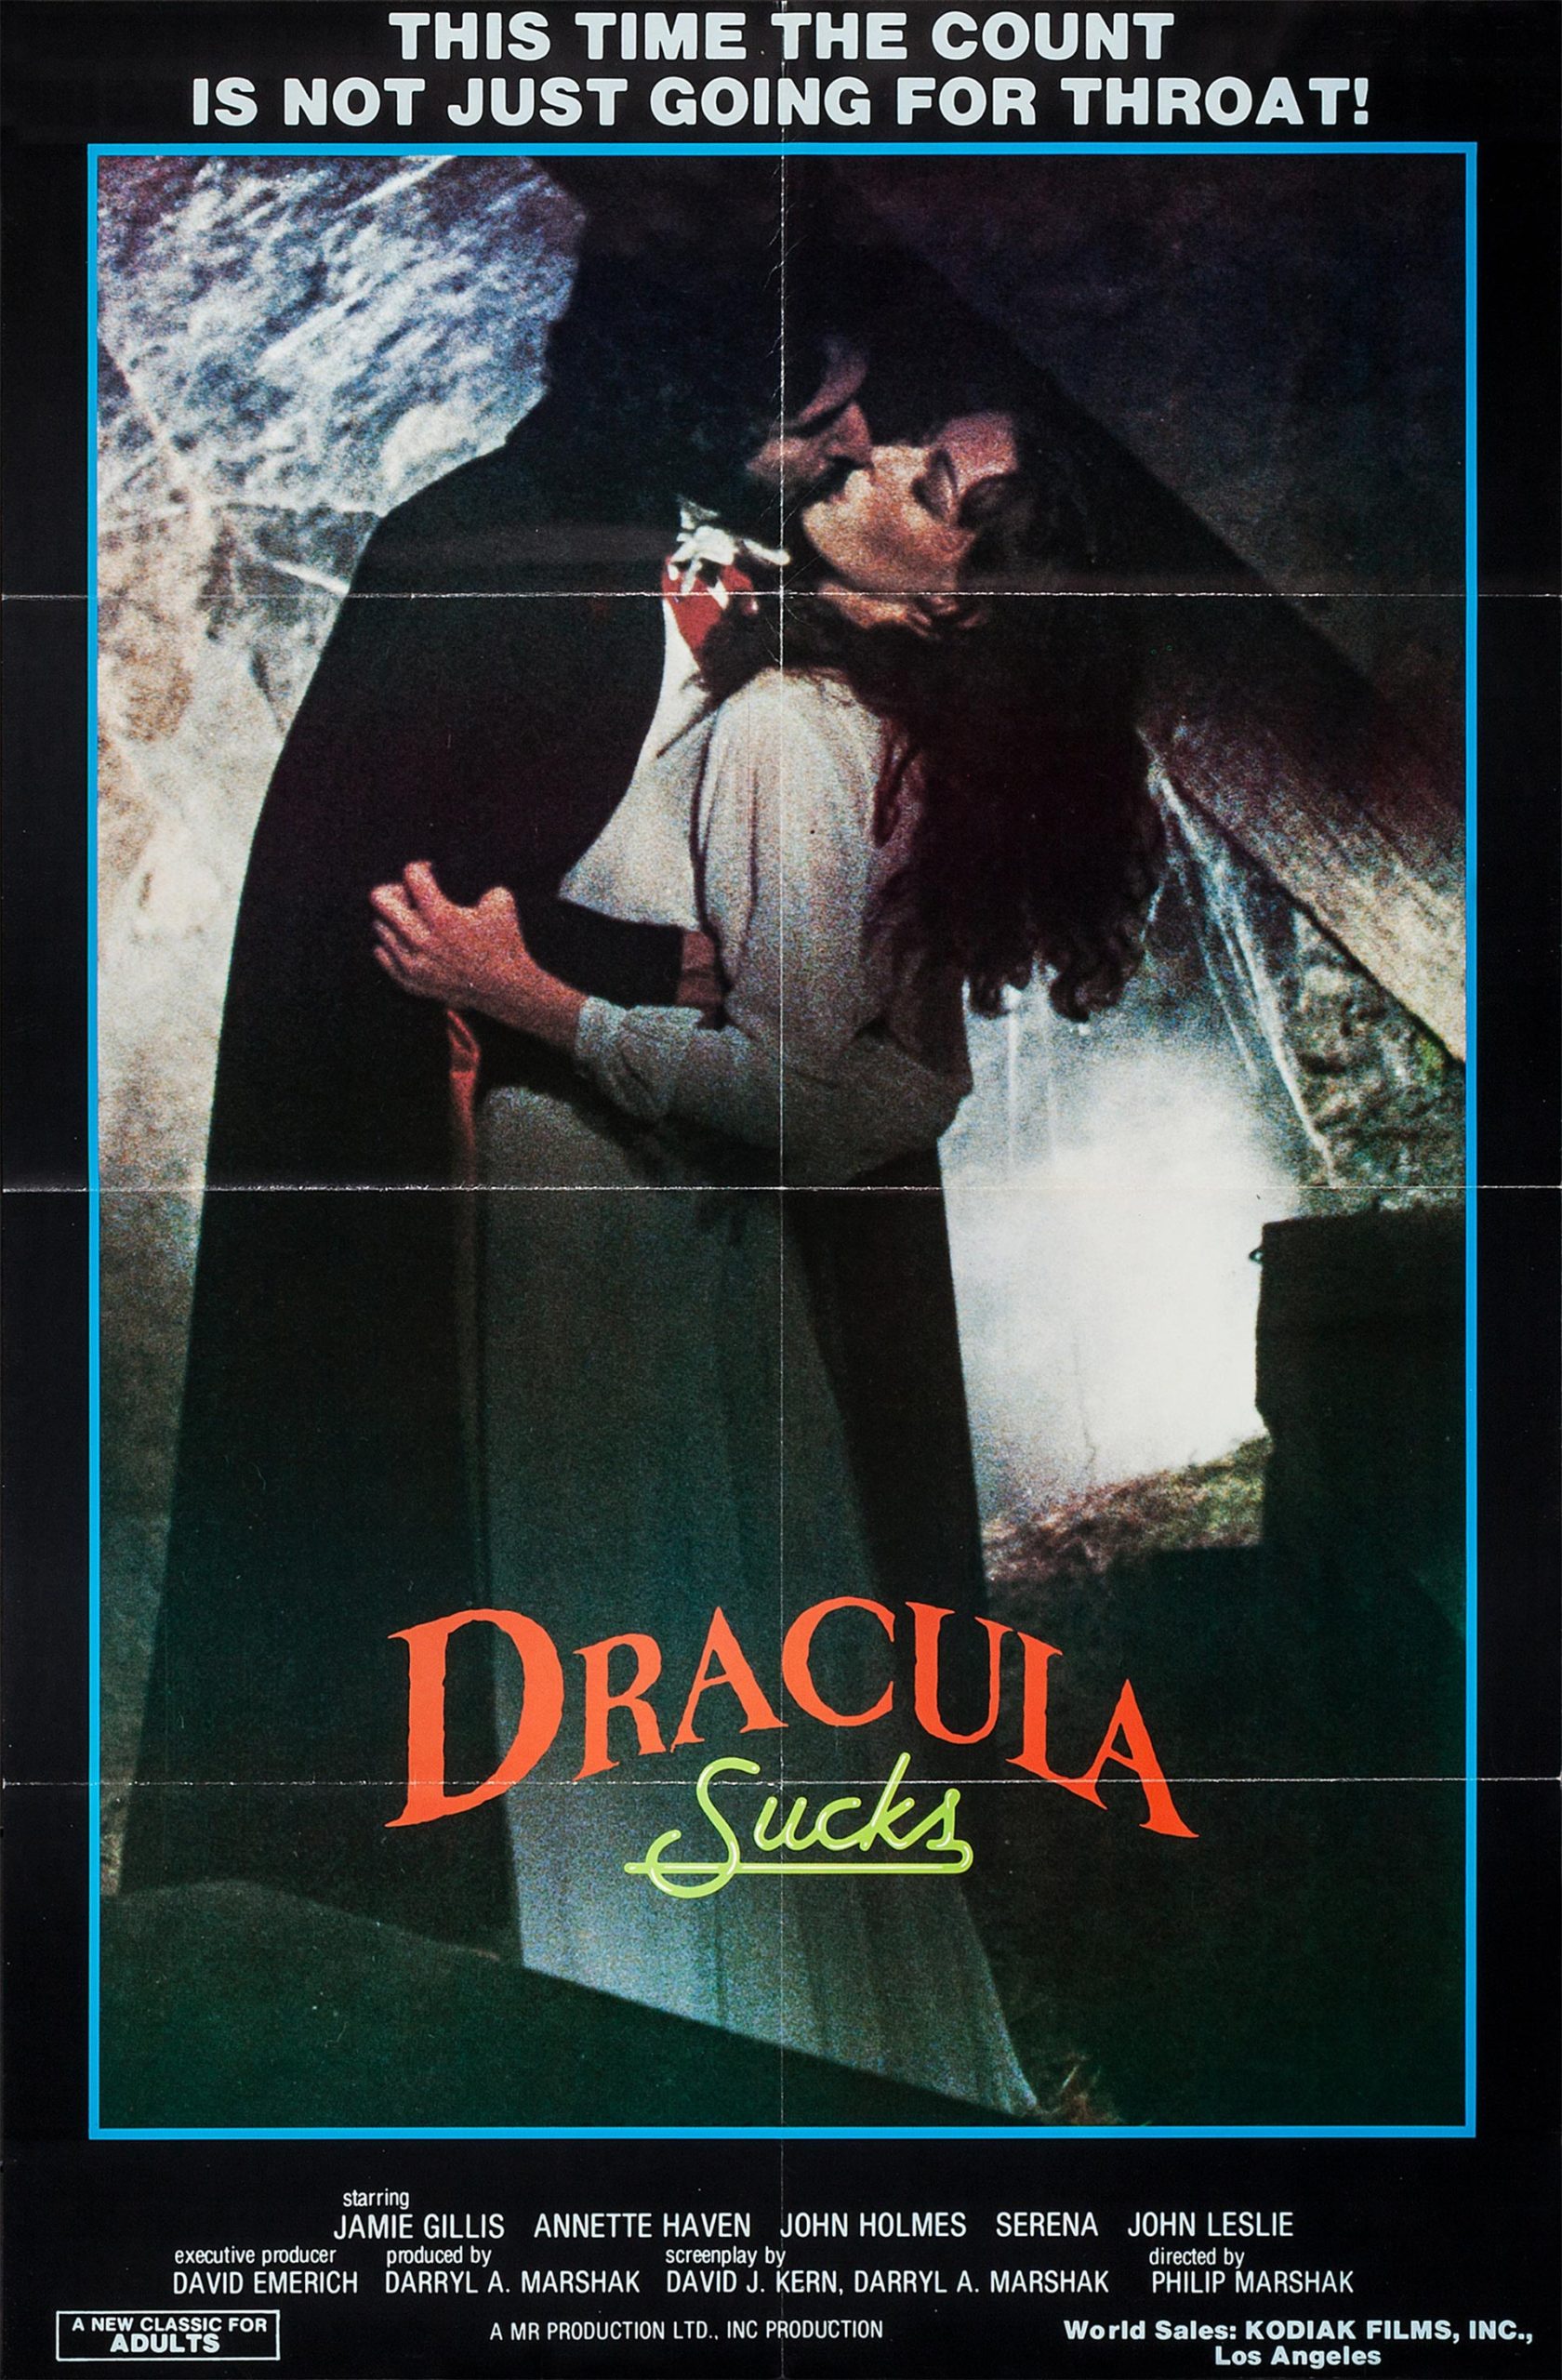 Dracula Forced Video - Dracula Sucks DVD Review from Vinegar Syndrome! - Severed Cinema